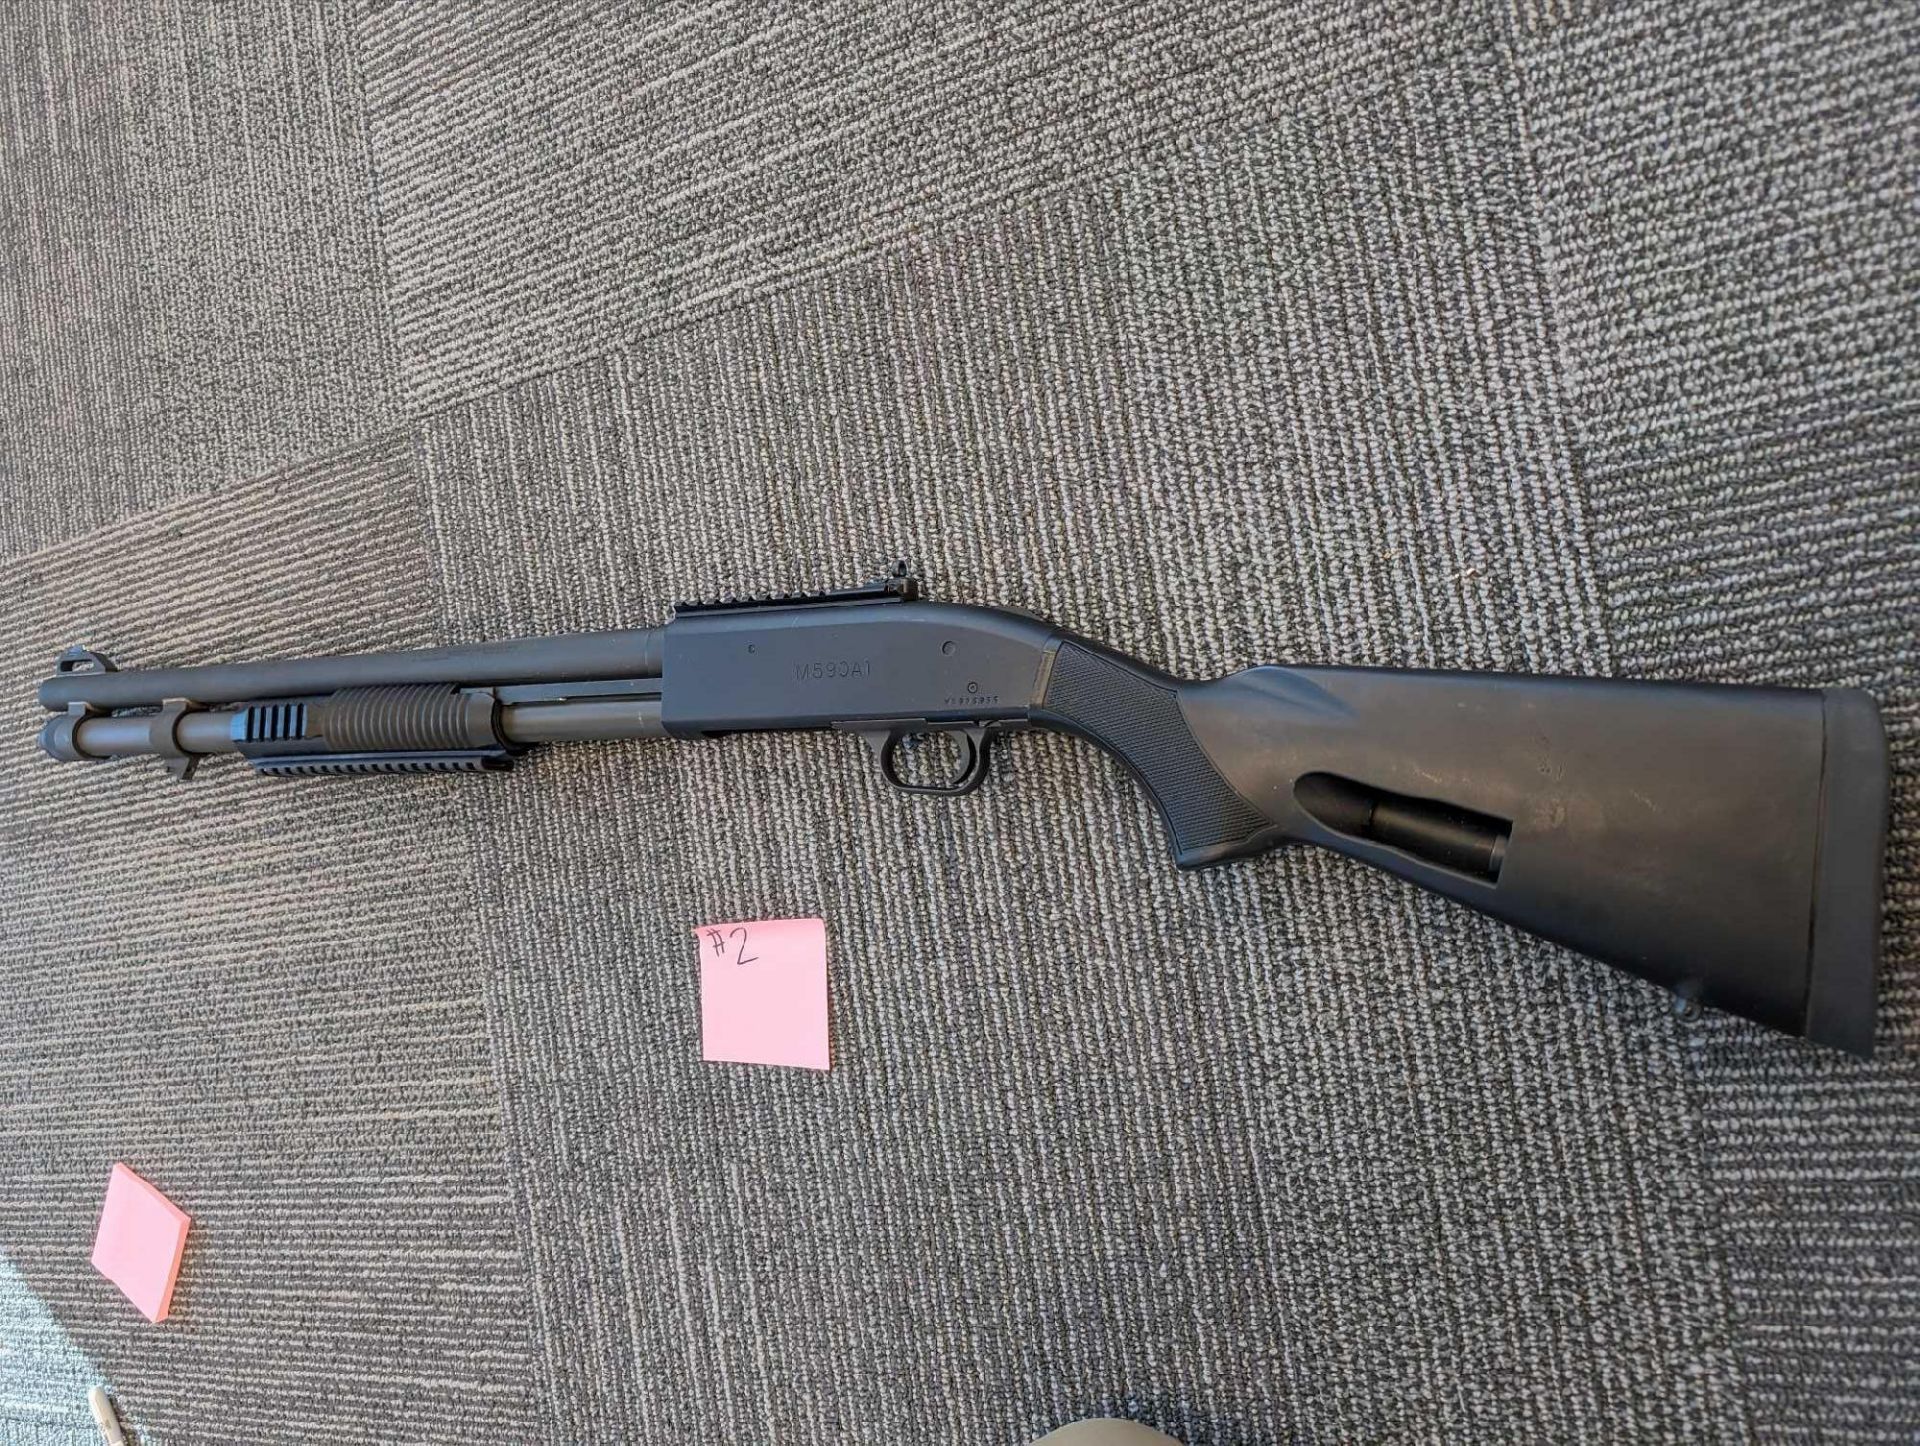 Mossberg model 590 12ga #V0975955   This will only be sold to residents of Utah - Image 6 of 9